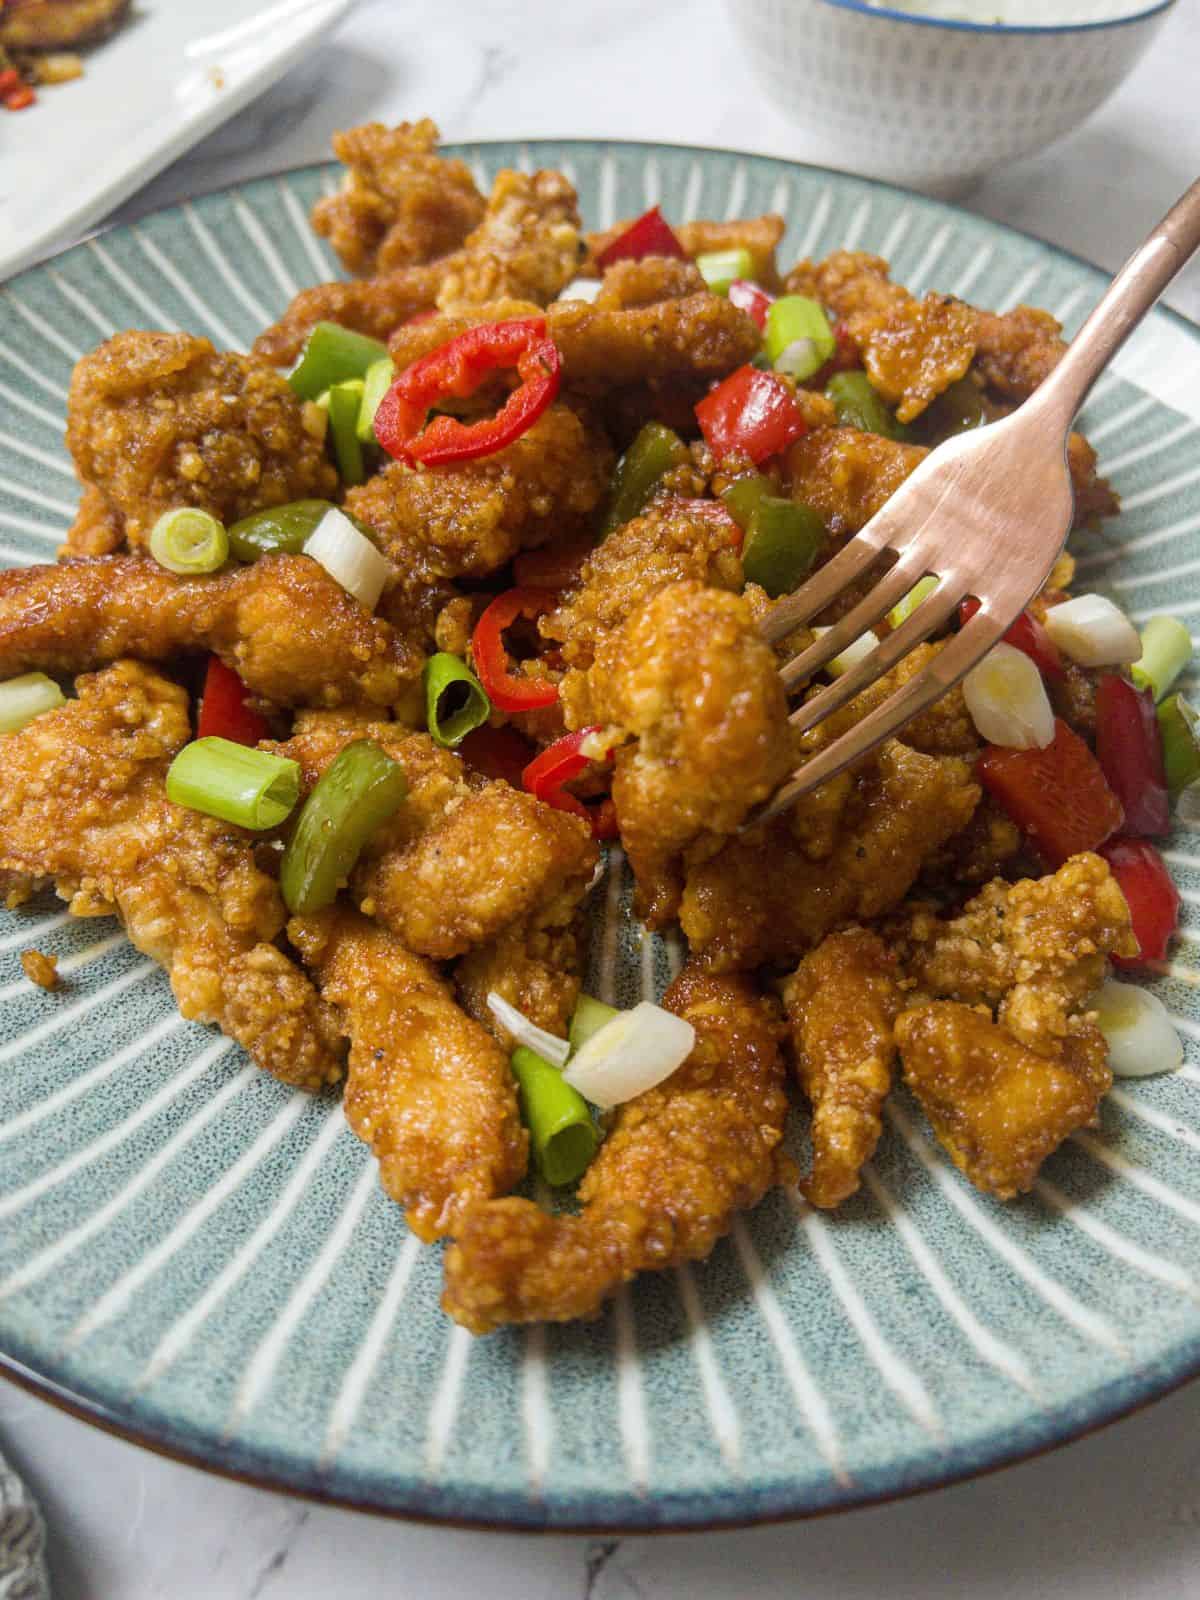 Close up shot of a fork holding a piece of crispy chicken over a plate of crispy chicken, garnished with spring onion and chilli.